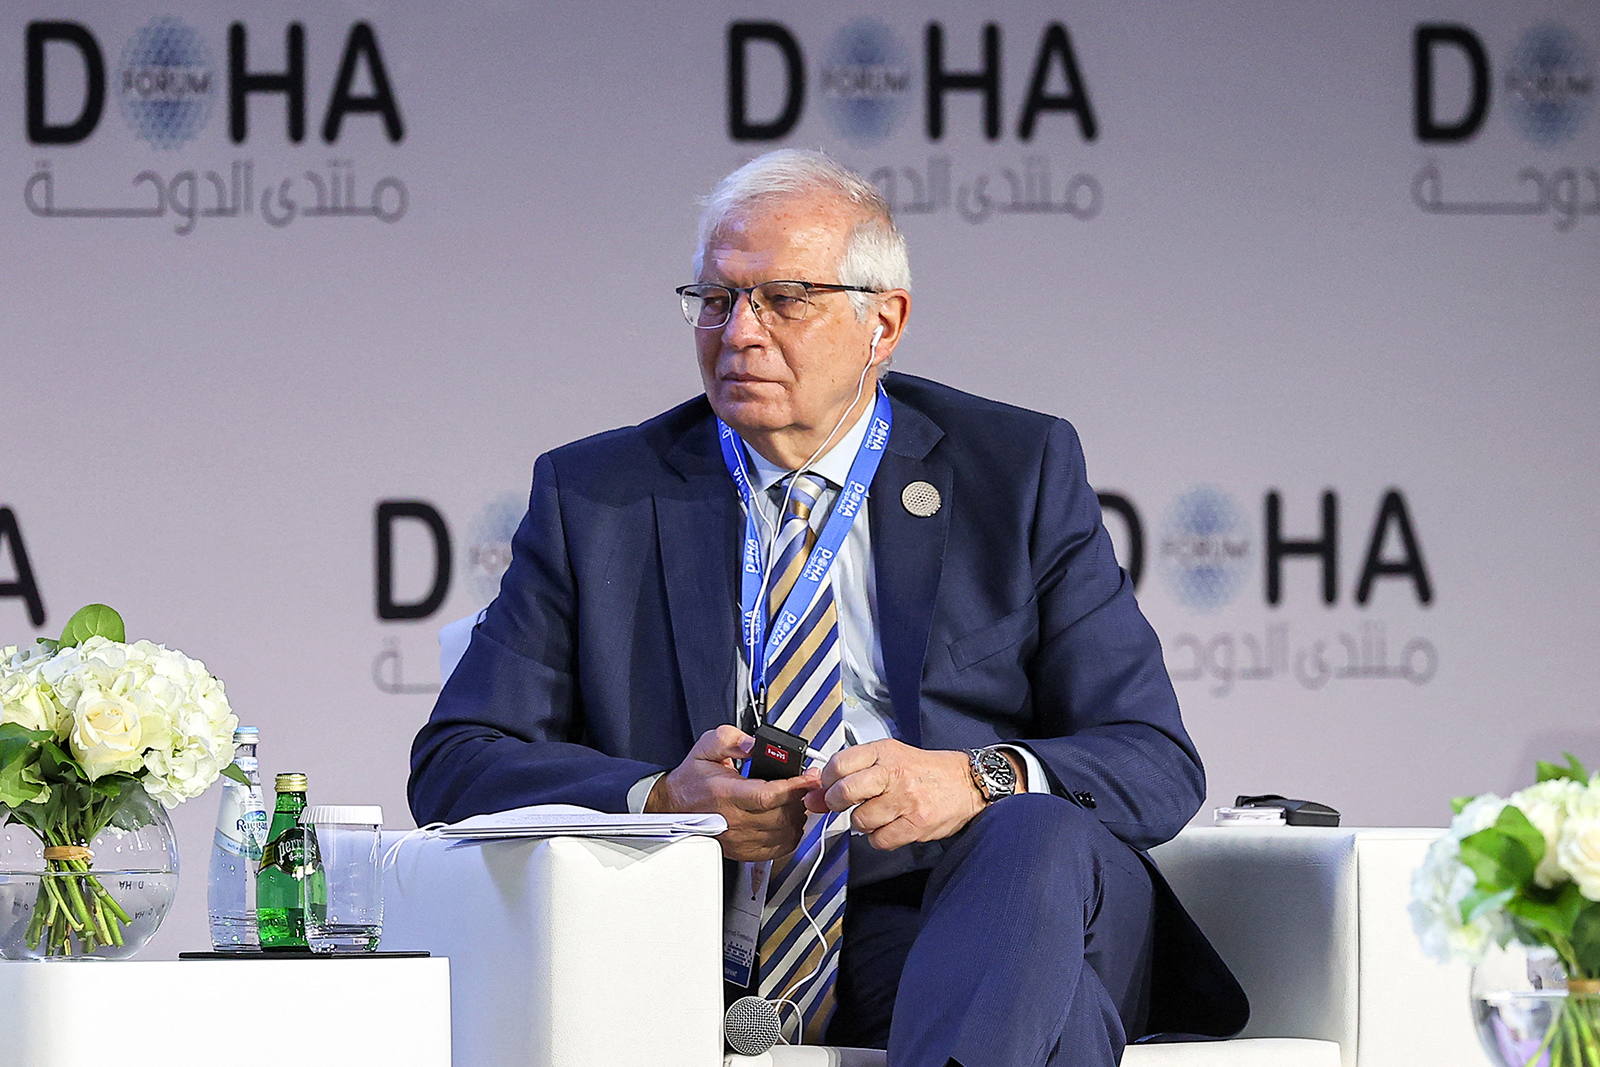 EU High Representative for Foreign Affairs and Security Policy Josep Borrell attends a plenary session titled "Transforming for a New Era", during the Doha Forum in Qatar's capital on March 26.